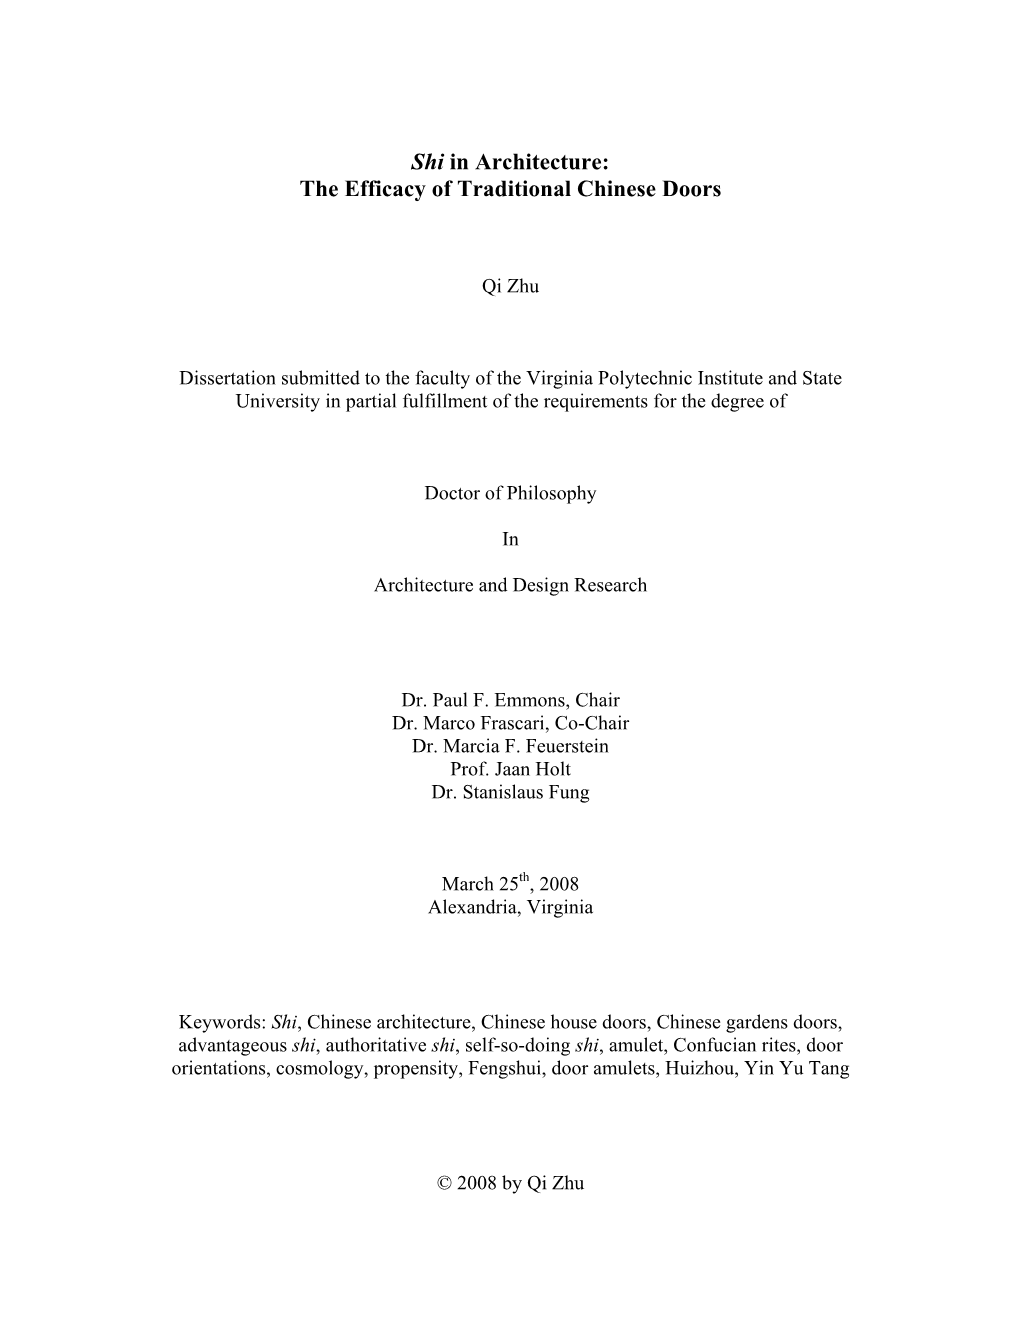 Cover Abstract Table of Contents